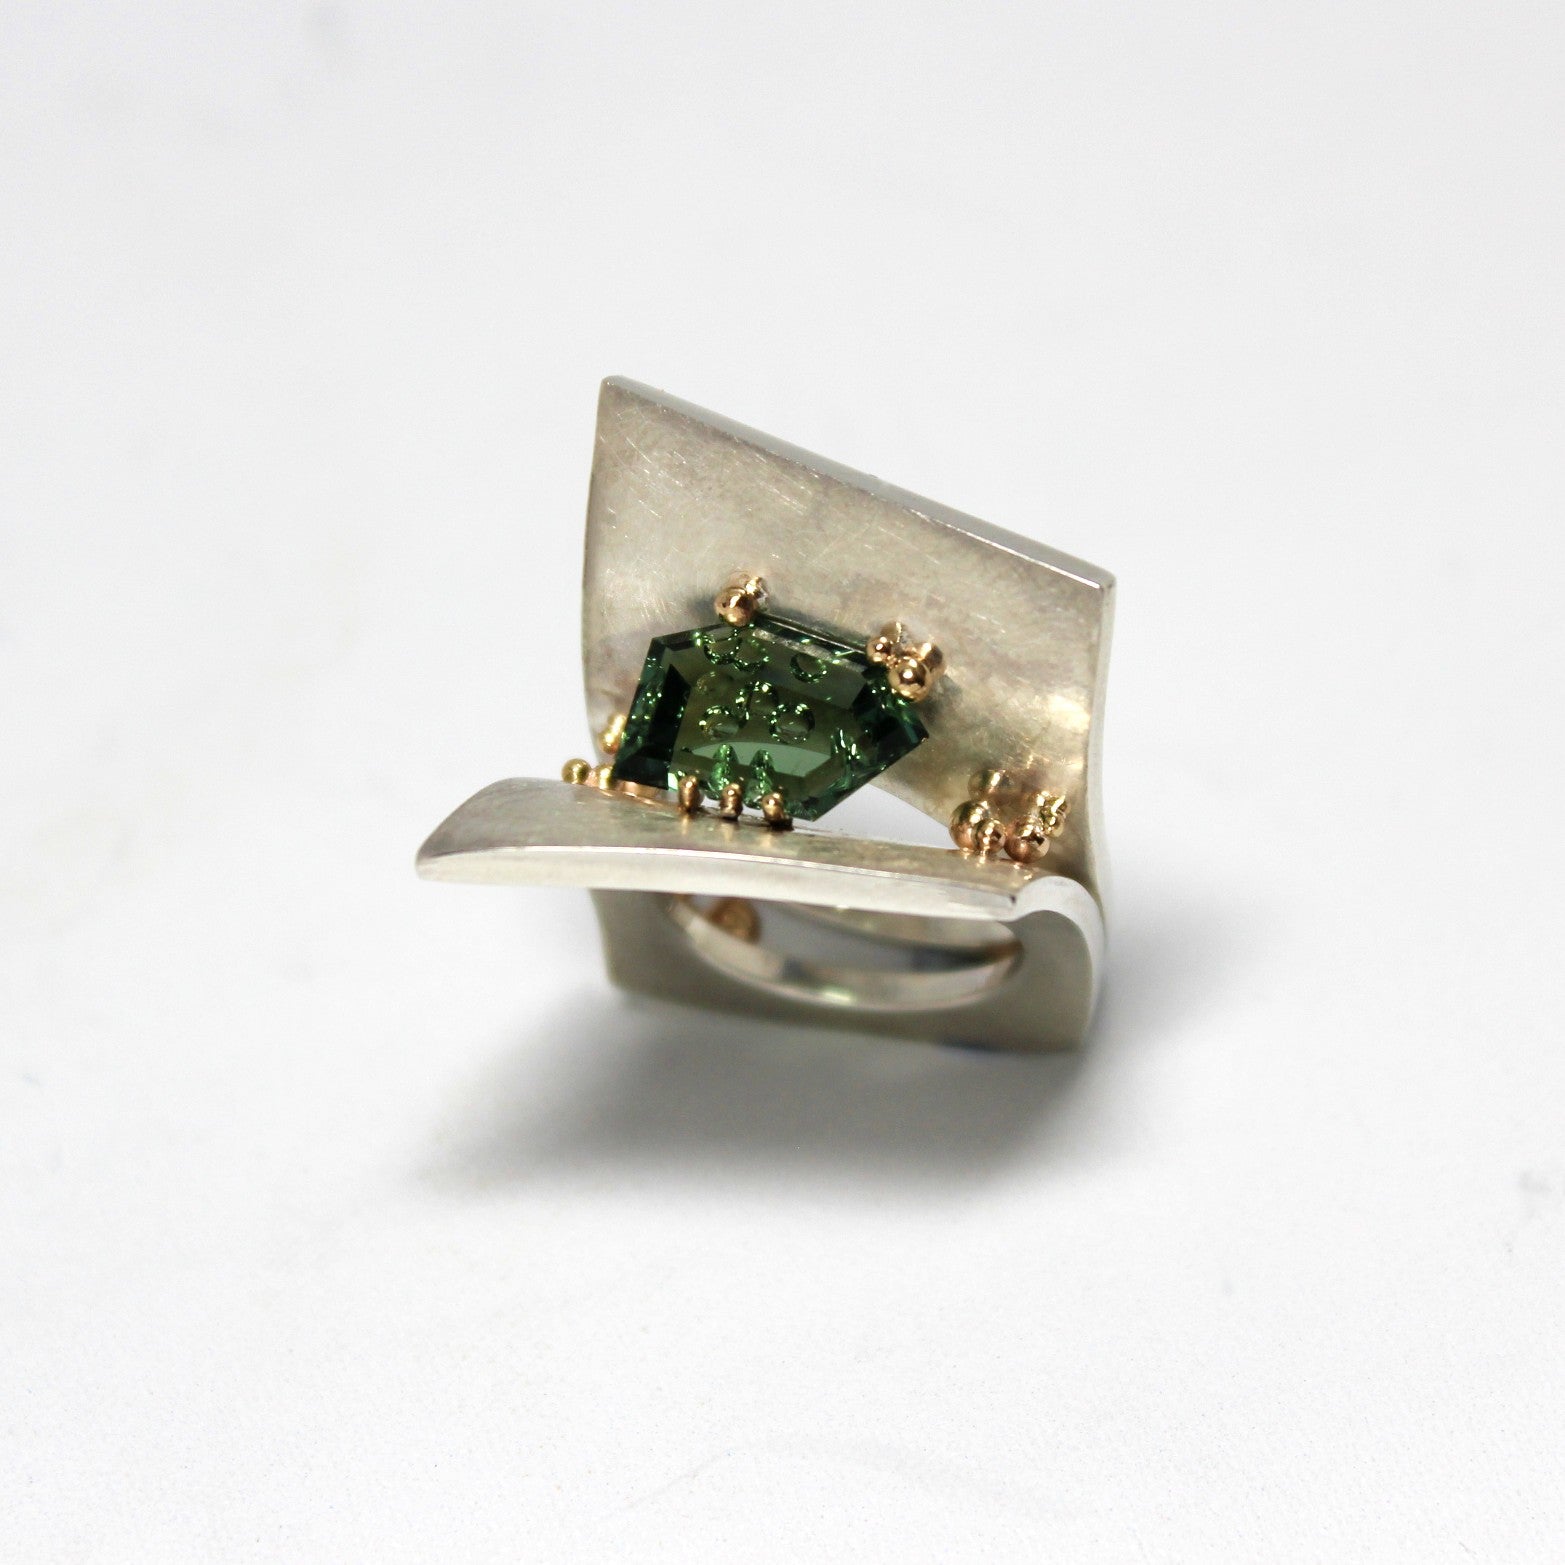 Sterling Silver cocktail ring, featuring a freeform, hand cut Green Tourmaline, with 9ct Yellow Gold granules